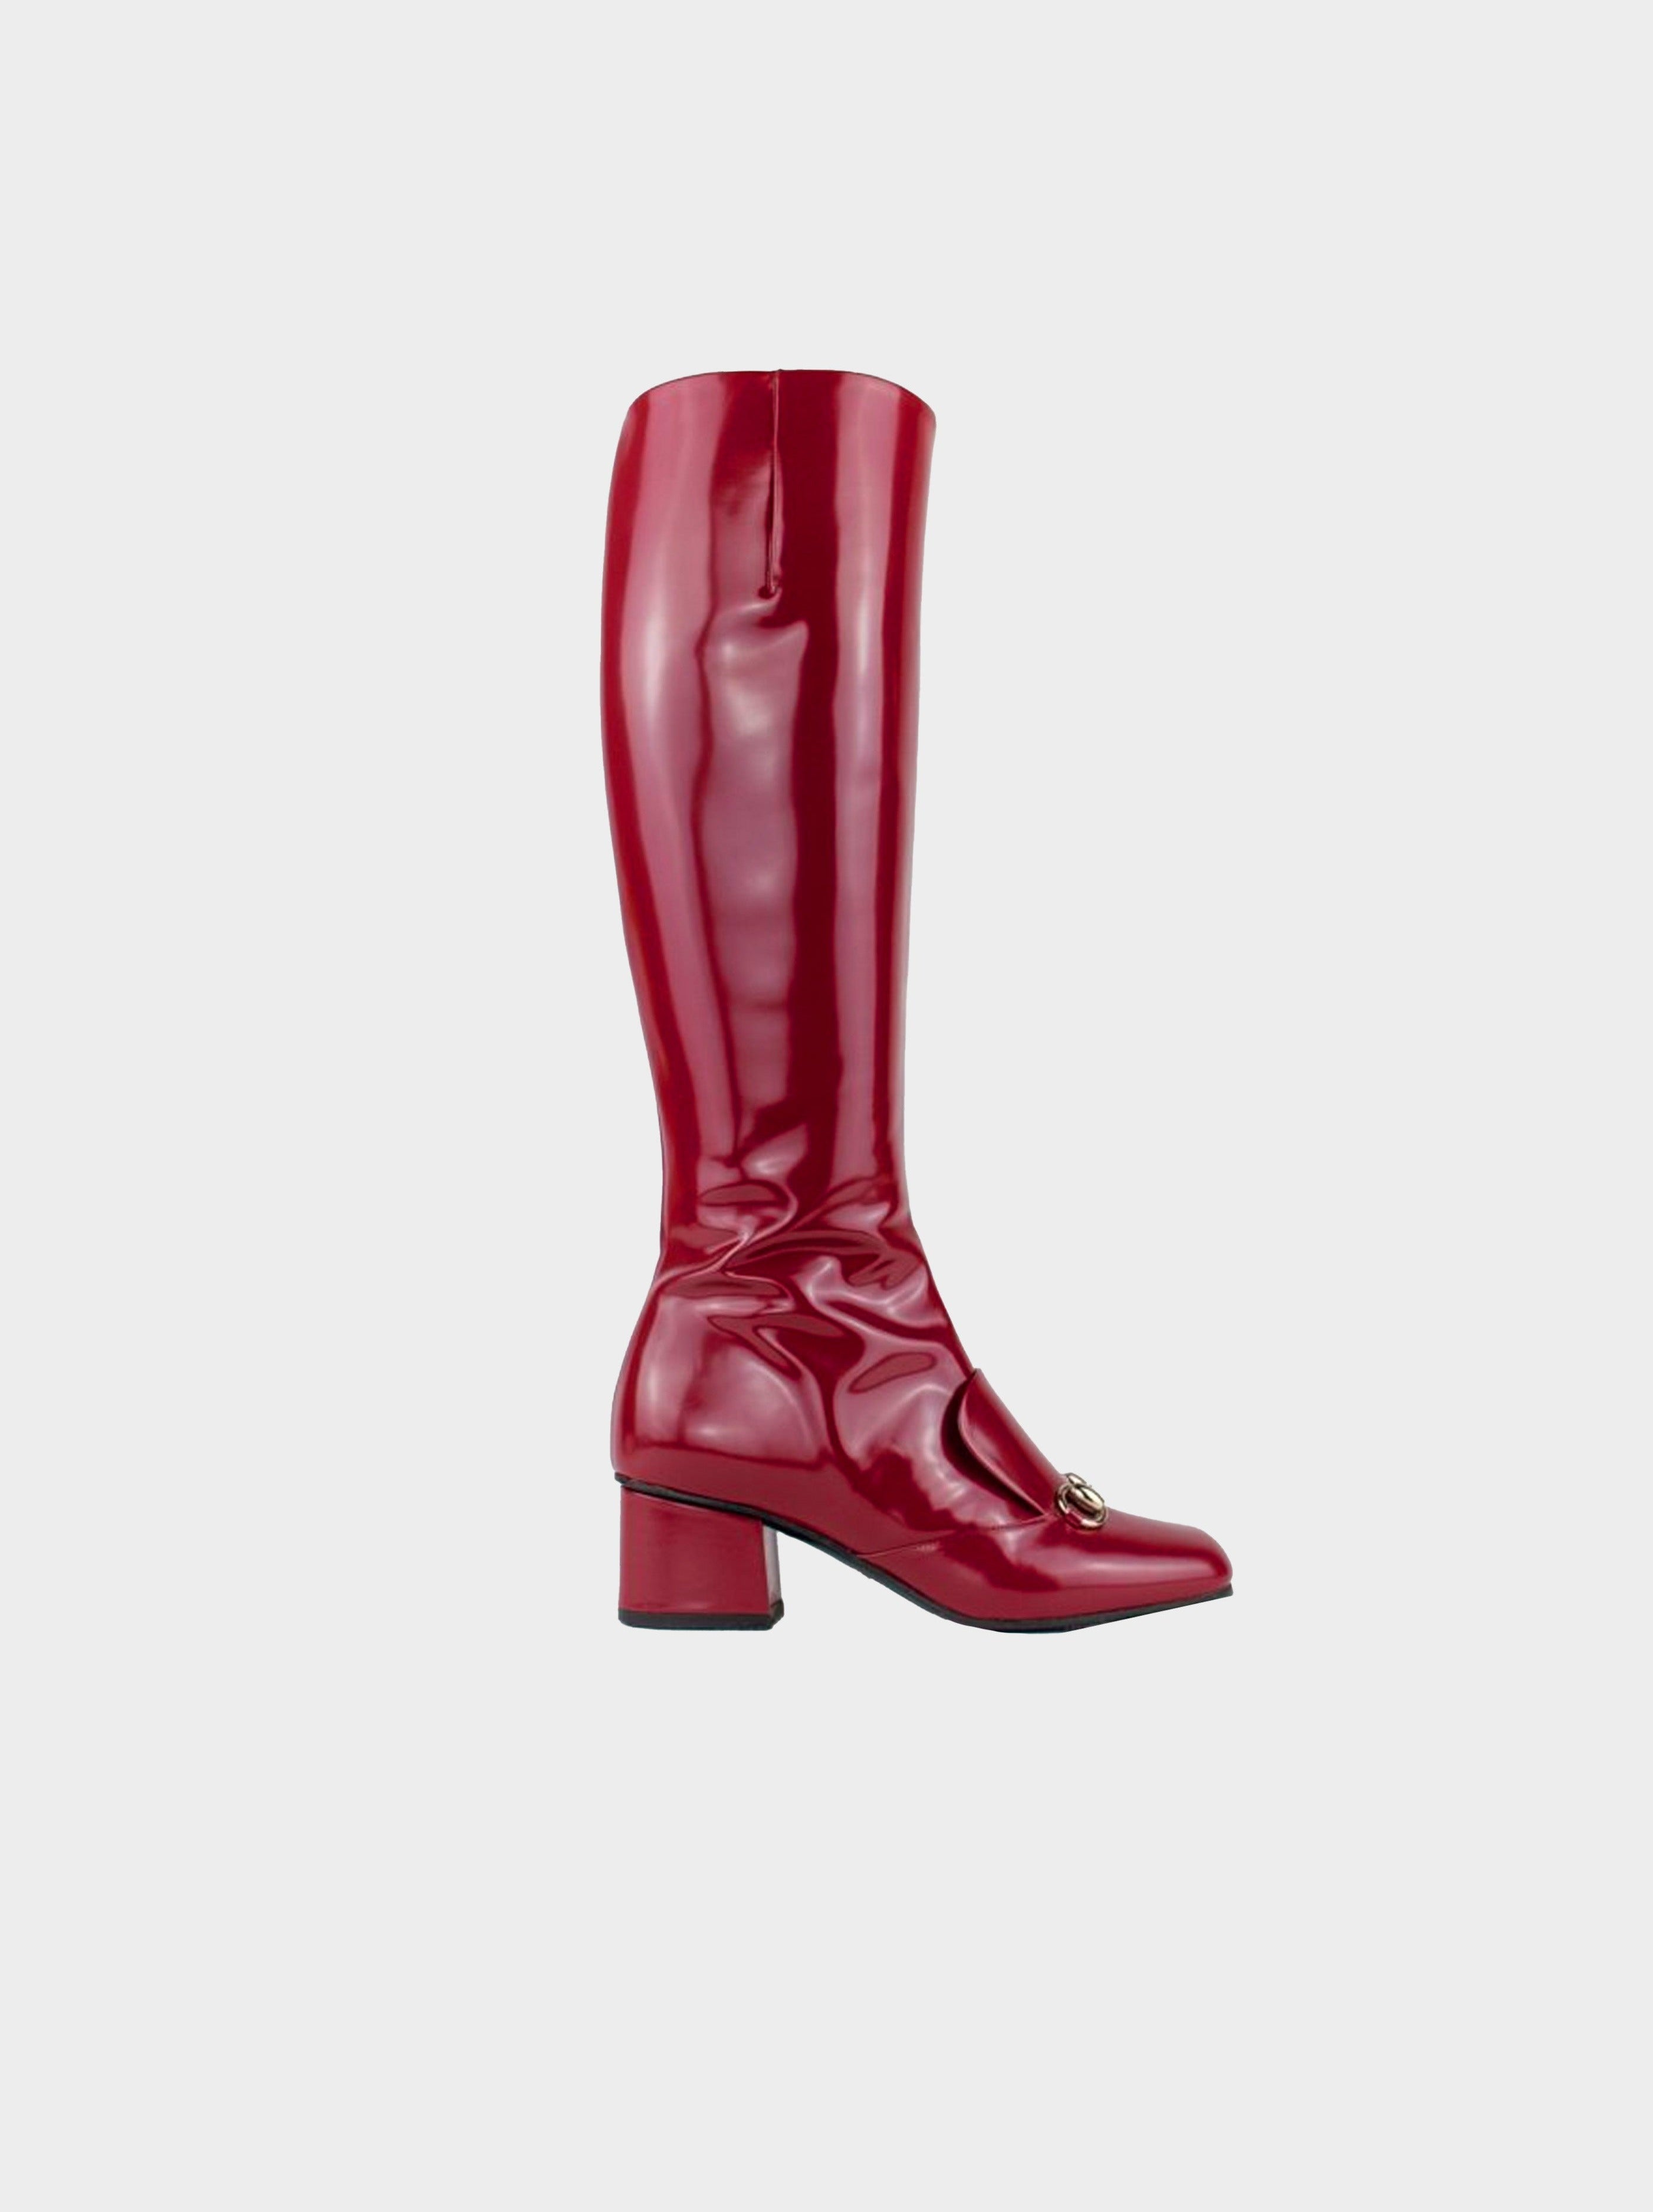 Gucci 2010s Red Patent Leather Horsebit Riding Boots